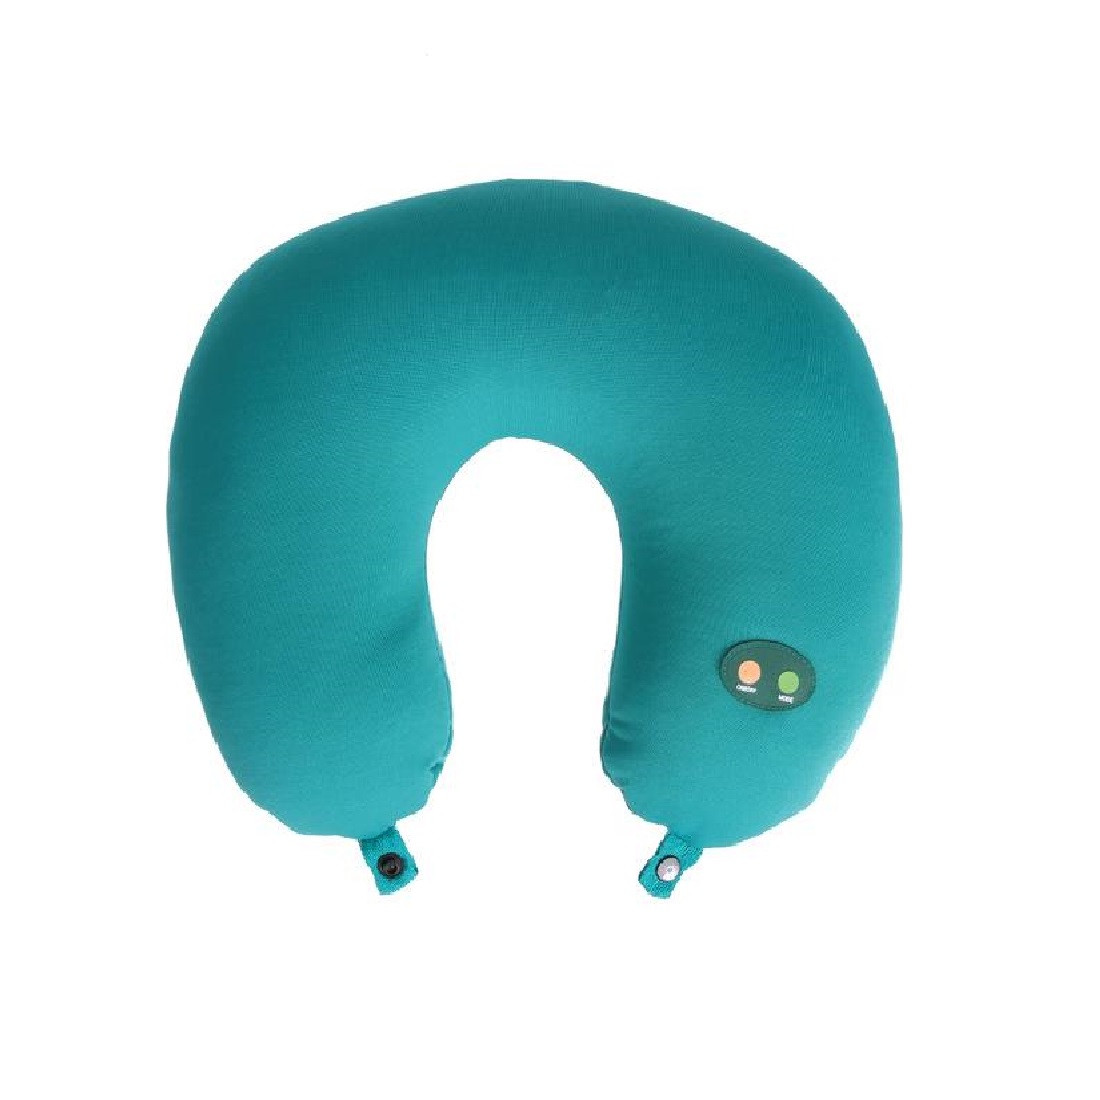 GHK H79 Cervical Massage Pillow U-Shaped Travel Friendly Portable & Compact Microbead Lightweight Vibrating Massager for Cervical Pain Relief, Battery Operated (2 AA Batteries, Not Included)